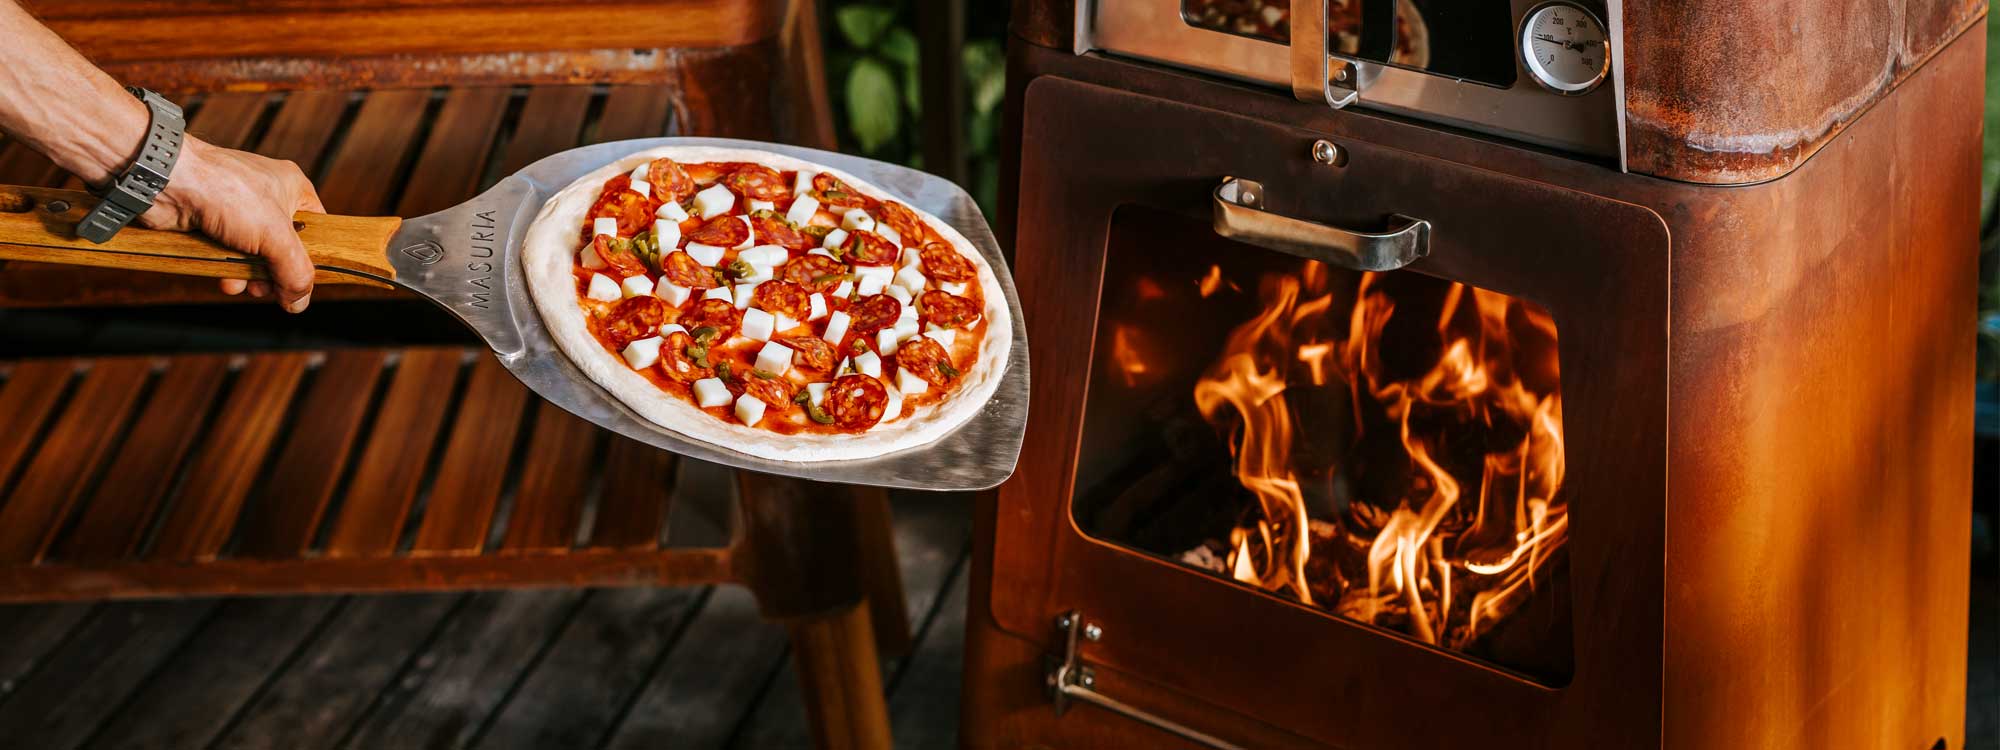 M-Classic pizza oven is a multifunctional outdoor fireplace & modern pizza oven in stainless or corten steel by Masuria wood fired pizza oven co.